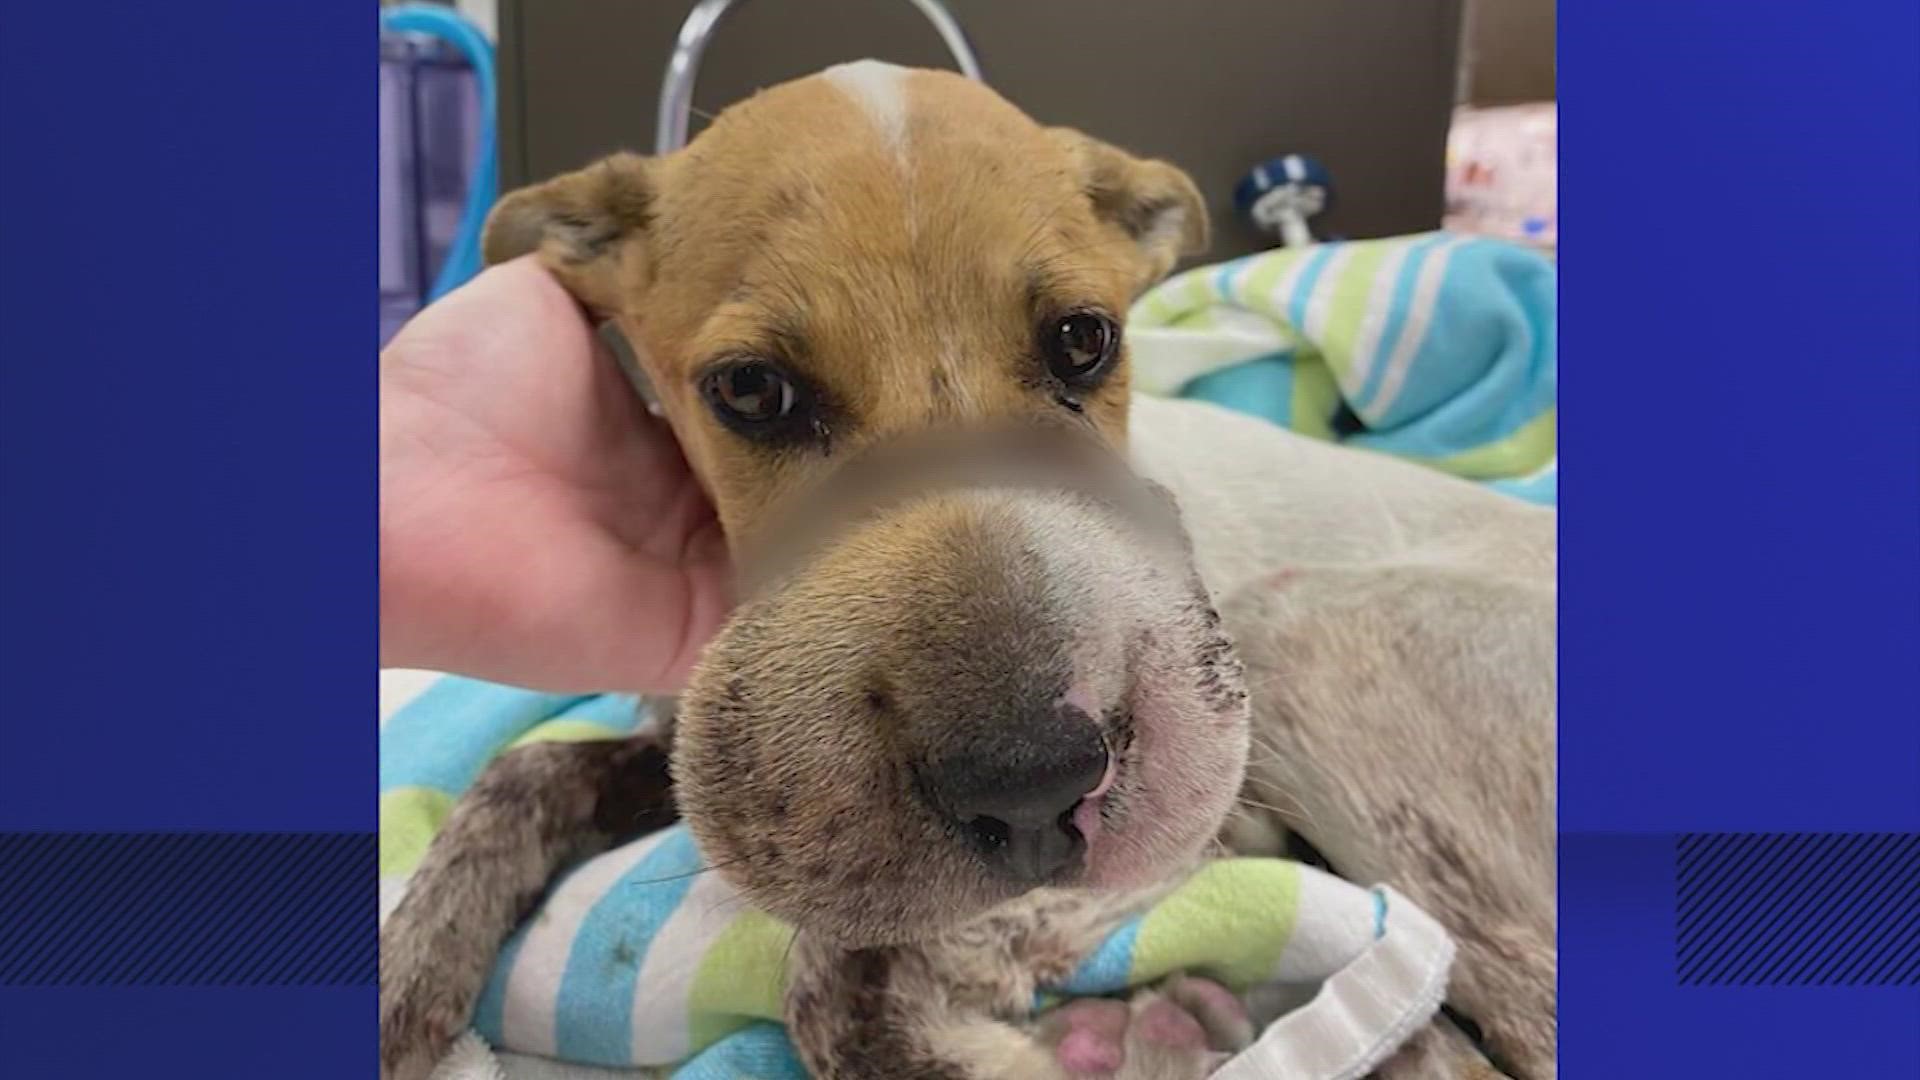 The Houston SPCA said someone wrapped a hair tie so tightly around the puppy's snout that it caused severe swelling and a deep laceration to the bone.